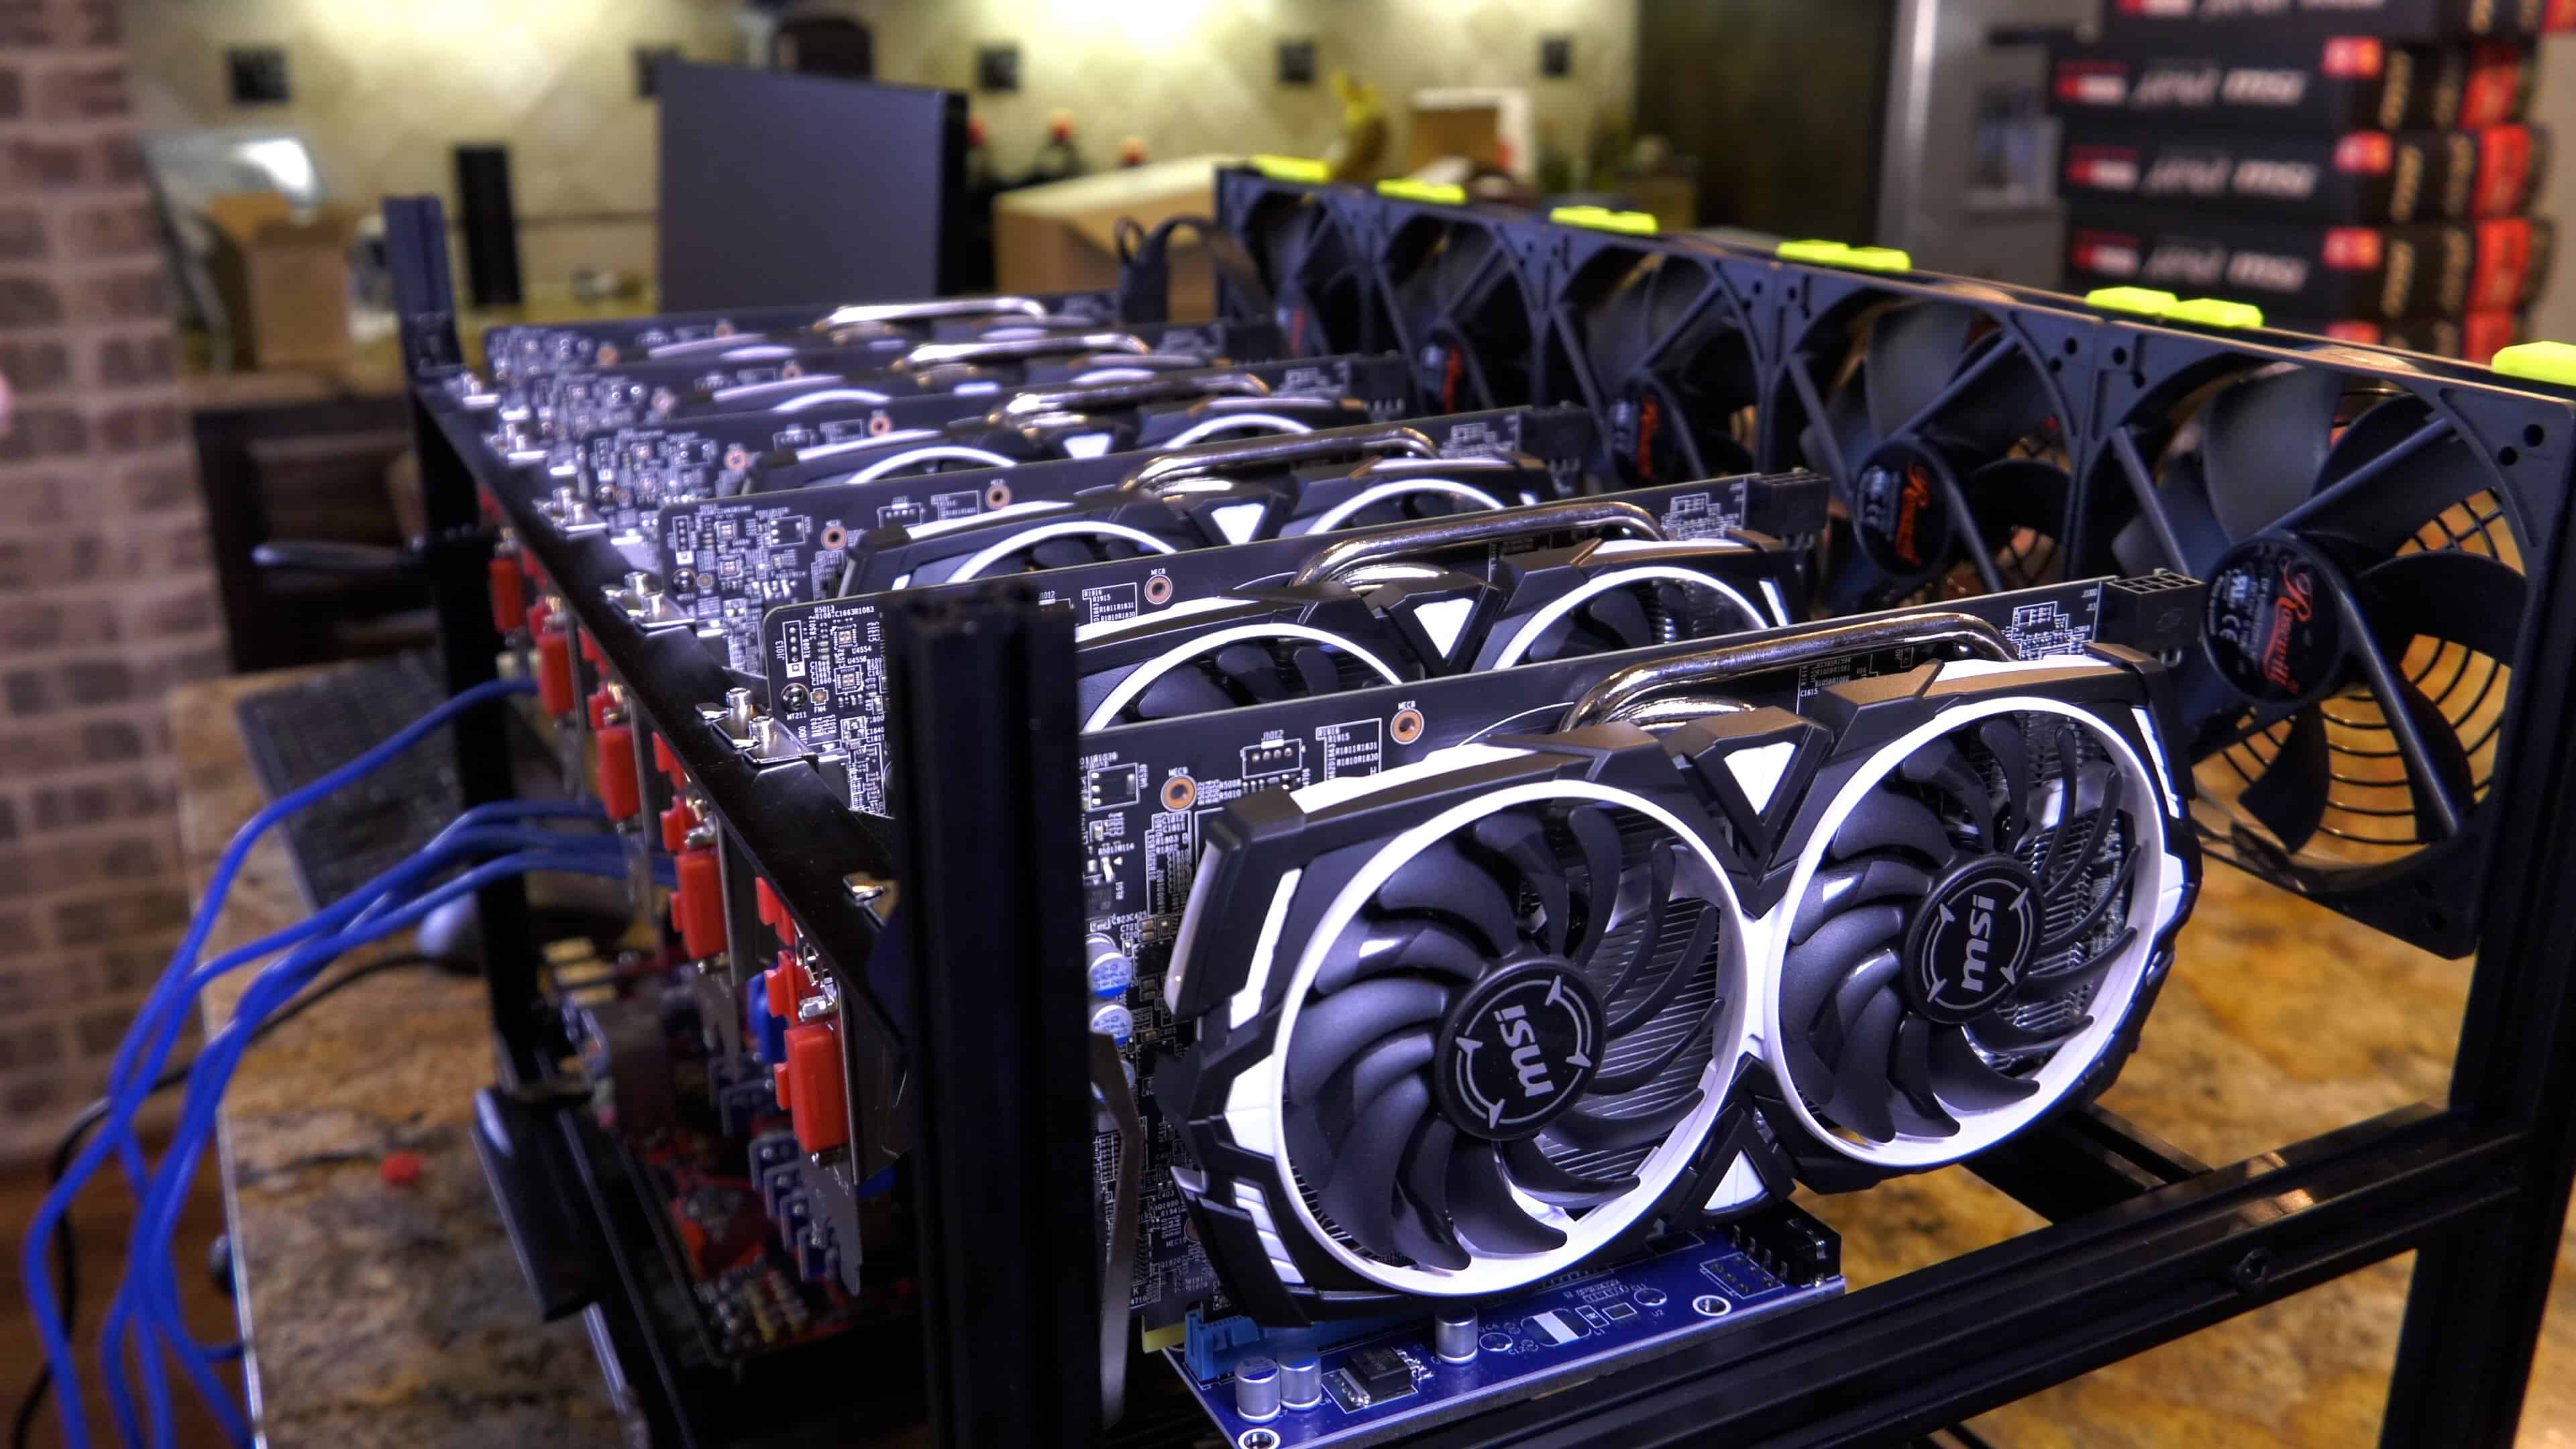 Overclocking the AMD RX 580 for Mining - The Geek Pub